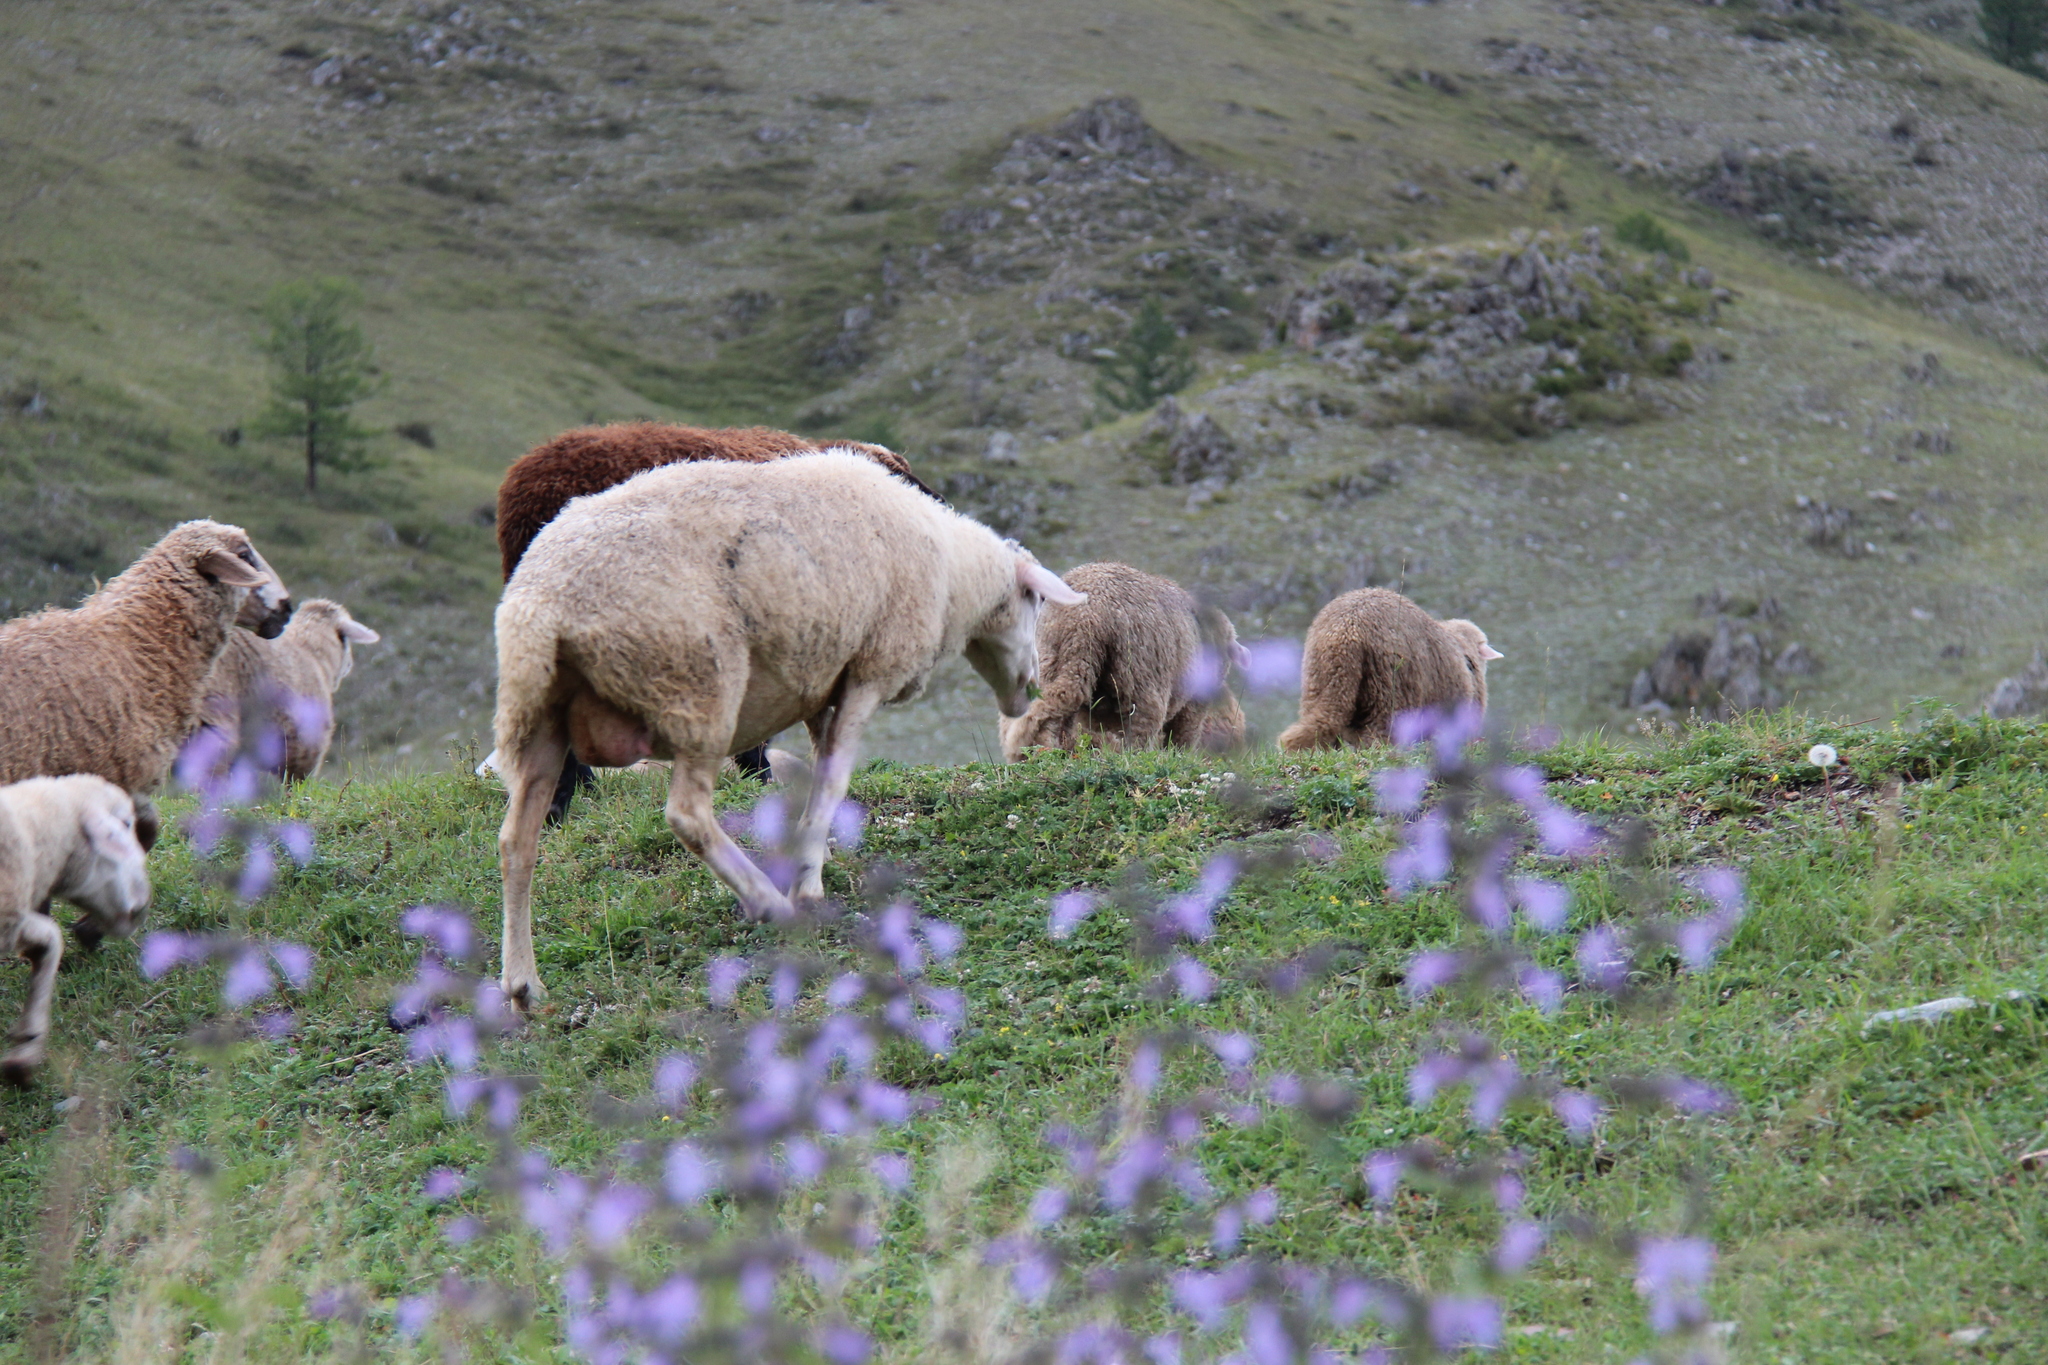 Altai stories - My, Altai, Sheeps, Travel across Russia, Mountain Altai, Author's story, Nature, The photo, beauty of nature, Longpost, Altai Republic